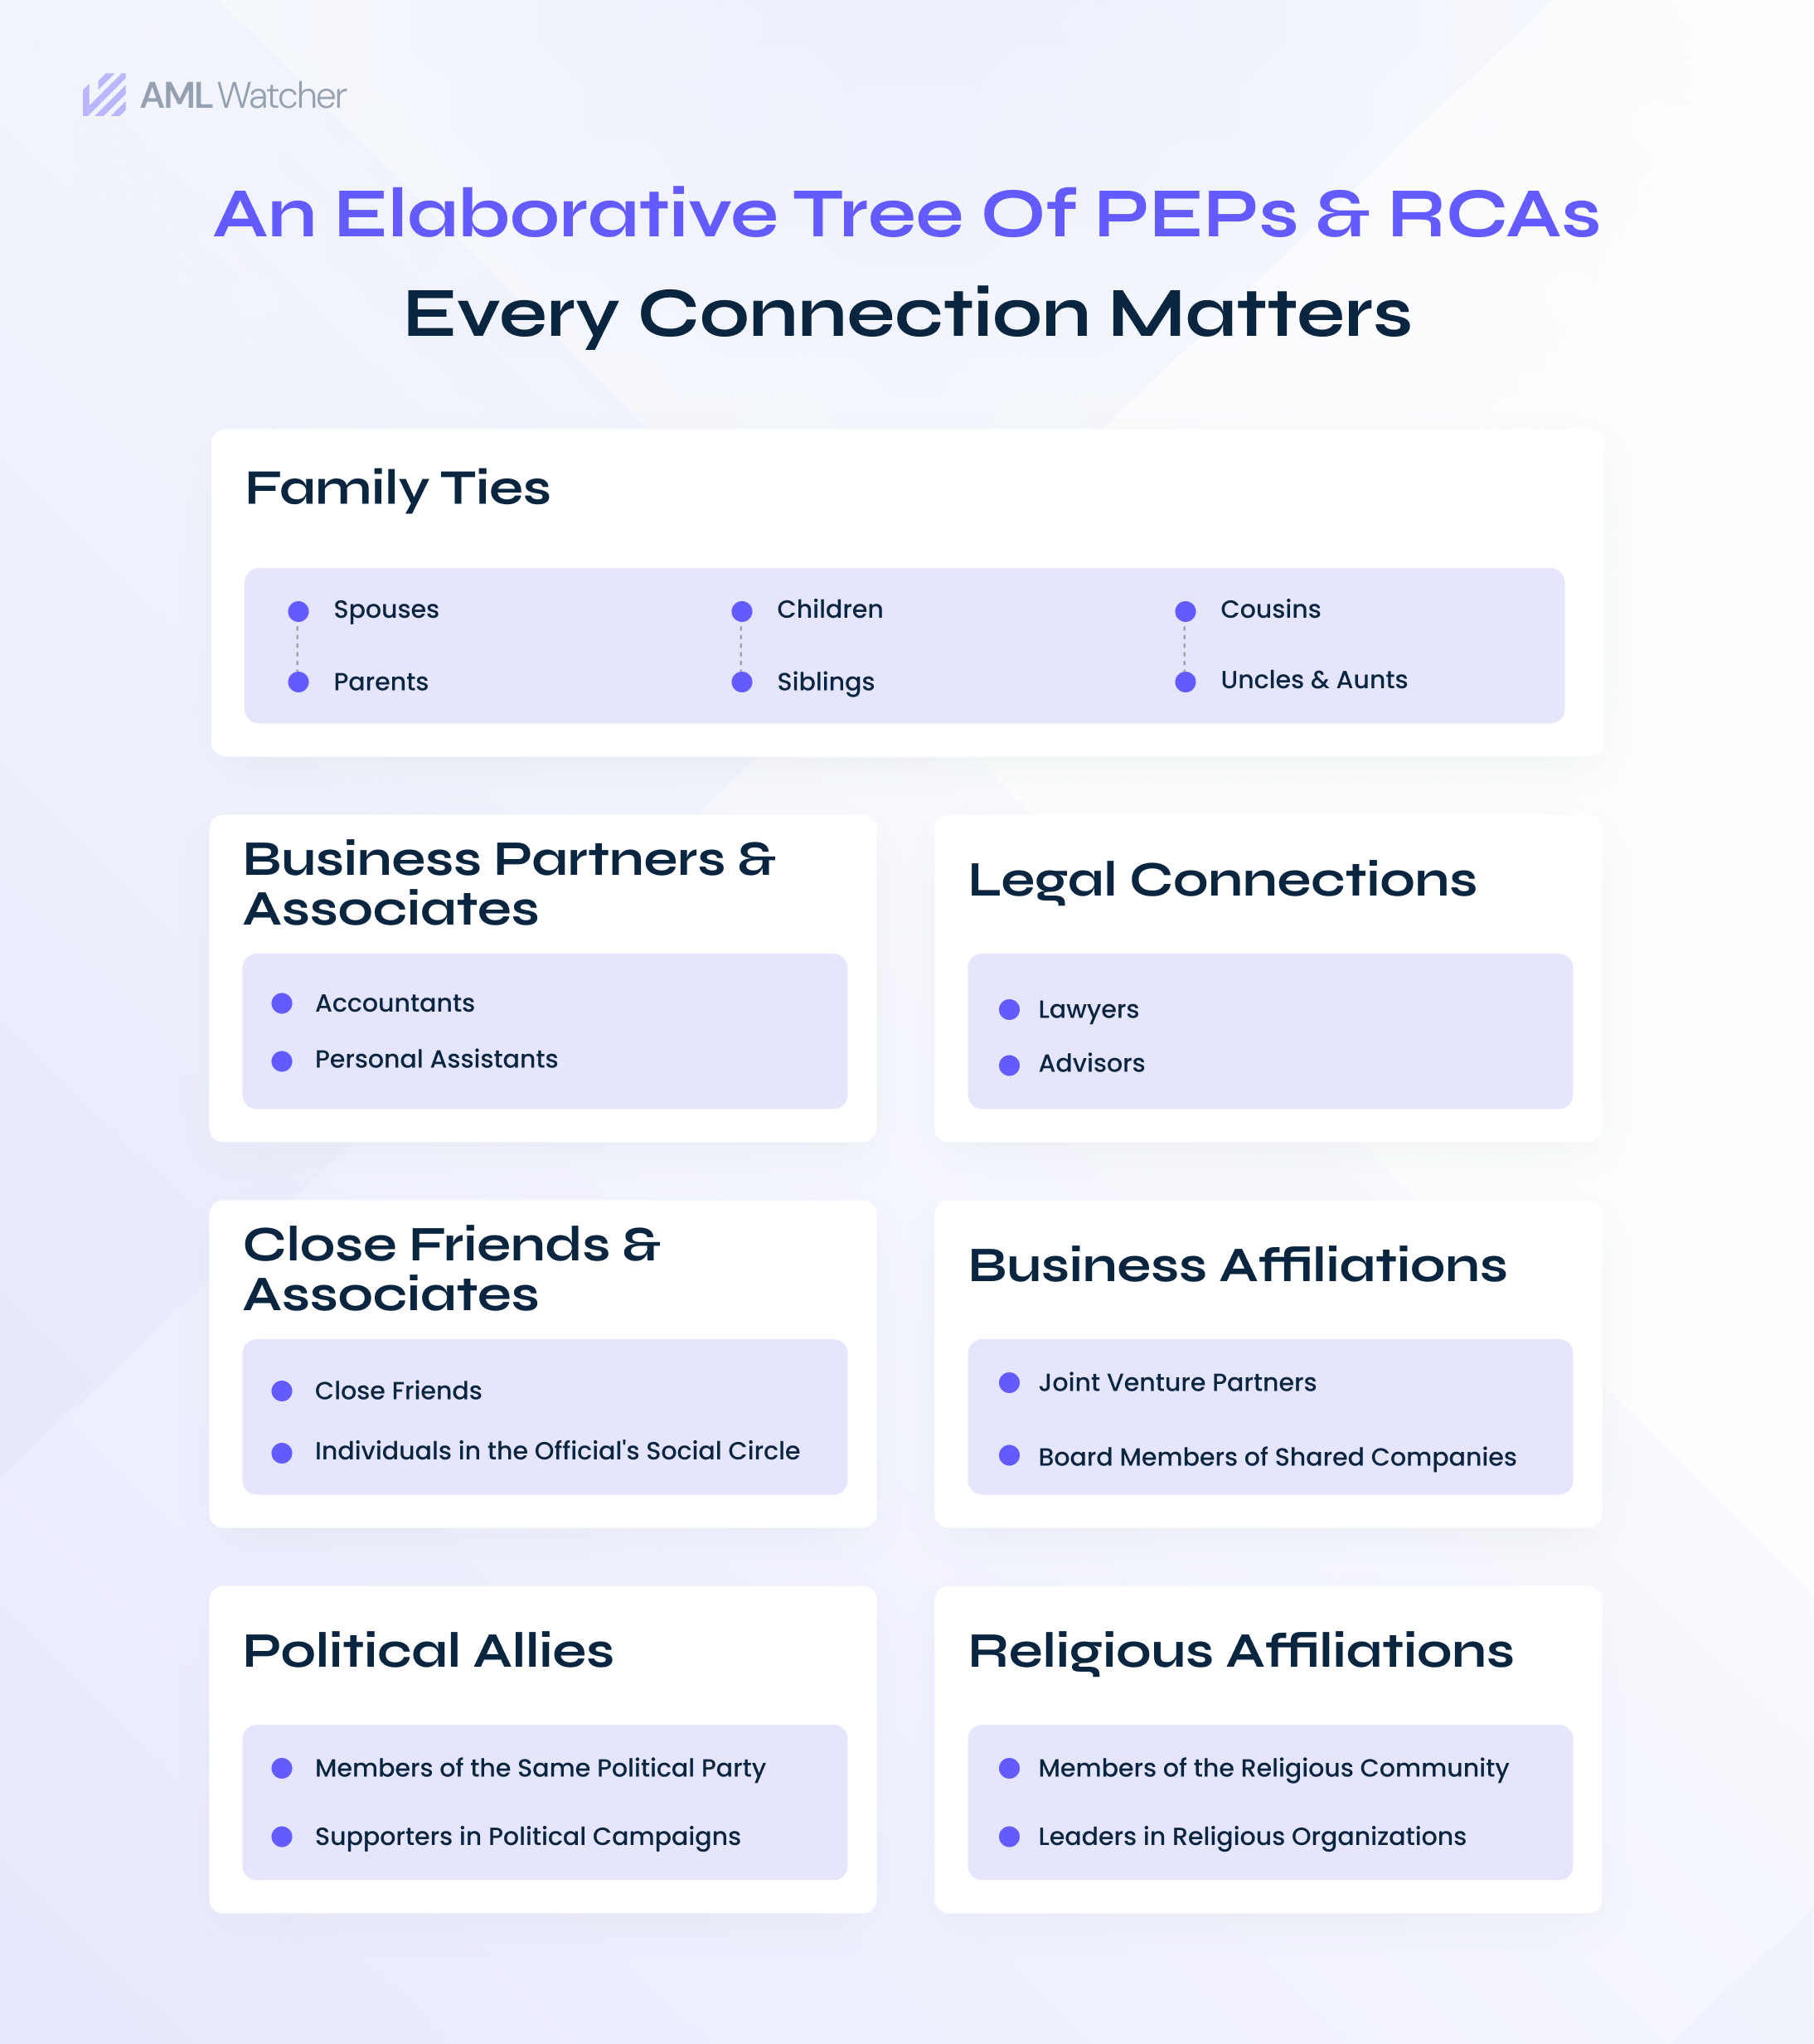 an elaborative display of connections associated with PEPs and RCAs including family ties and friends circle, business relationships, and legal and religious affiliations.